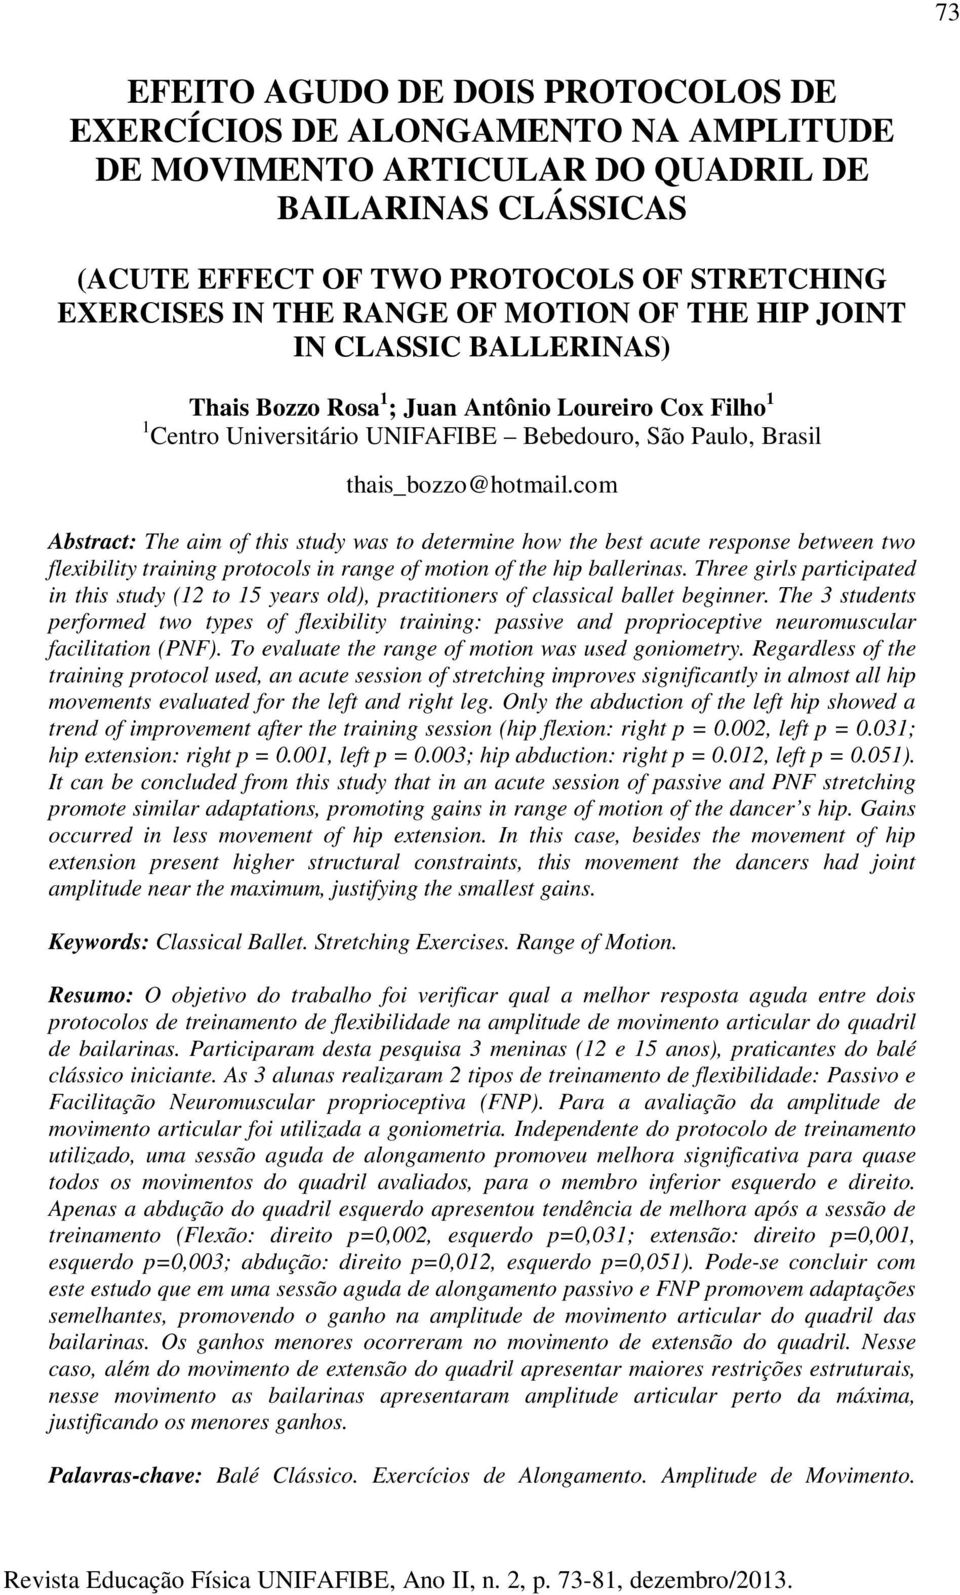 com Abstract: The aim of this study was to determine how the best acute response between two flexibility training protocols in range of motion of the hip ballerinas.